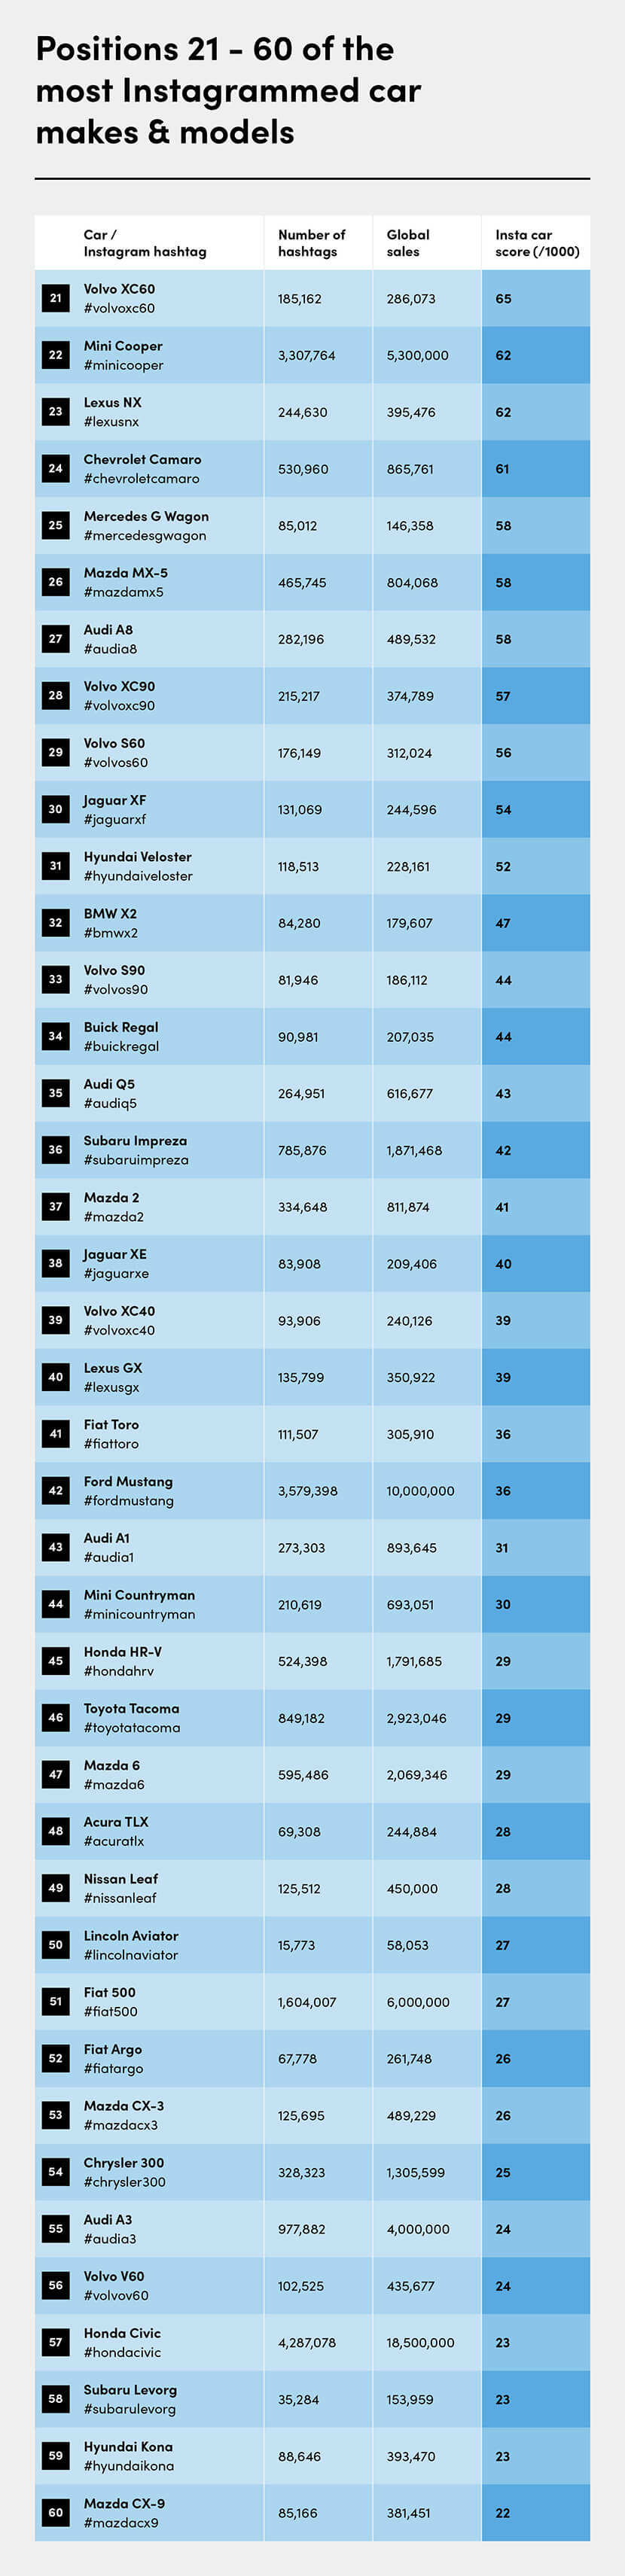 Table showing positions 21-60 of the 100 most Instagrammed cars in the world